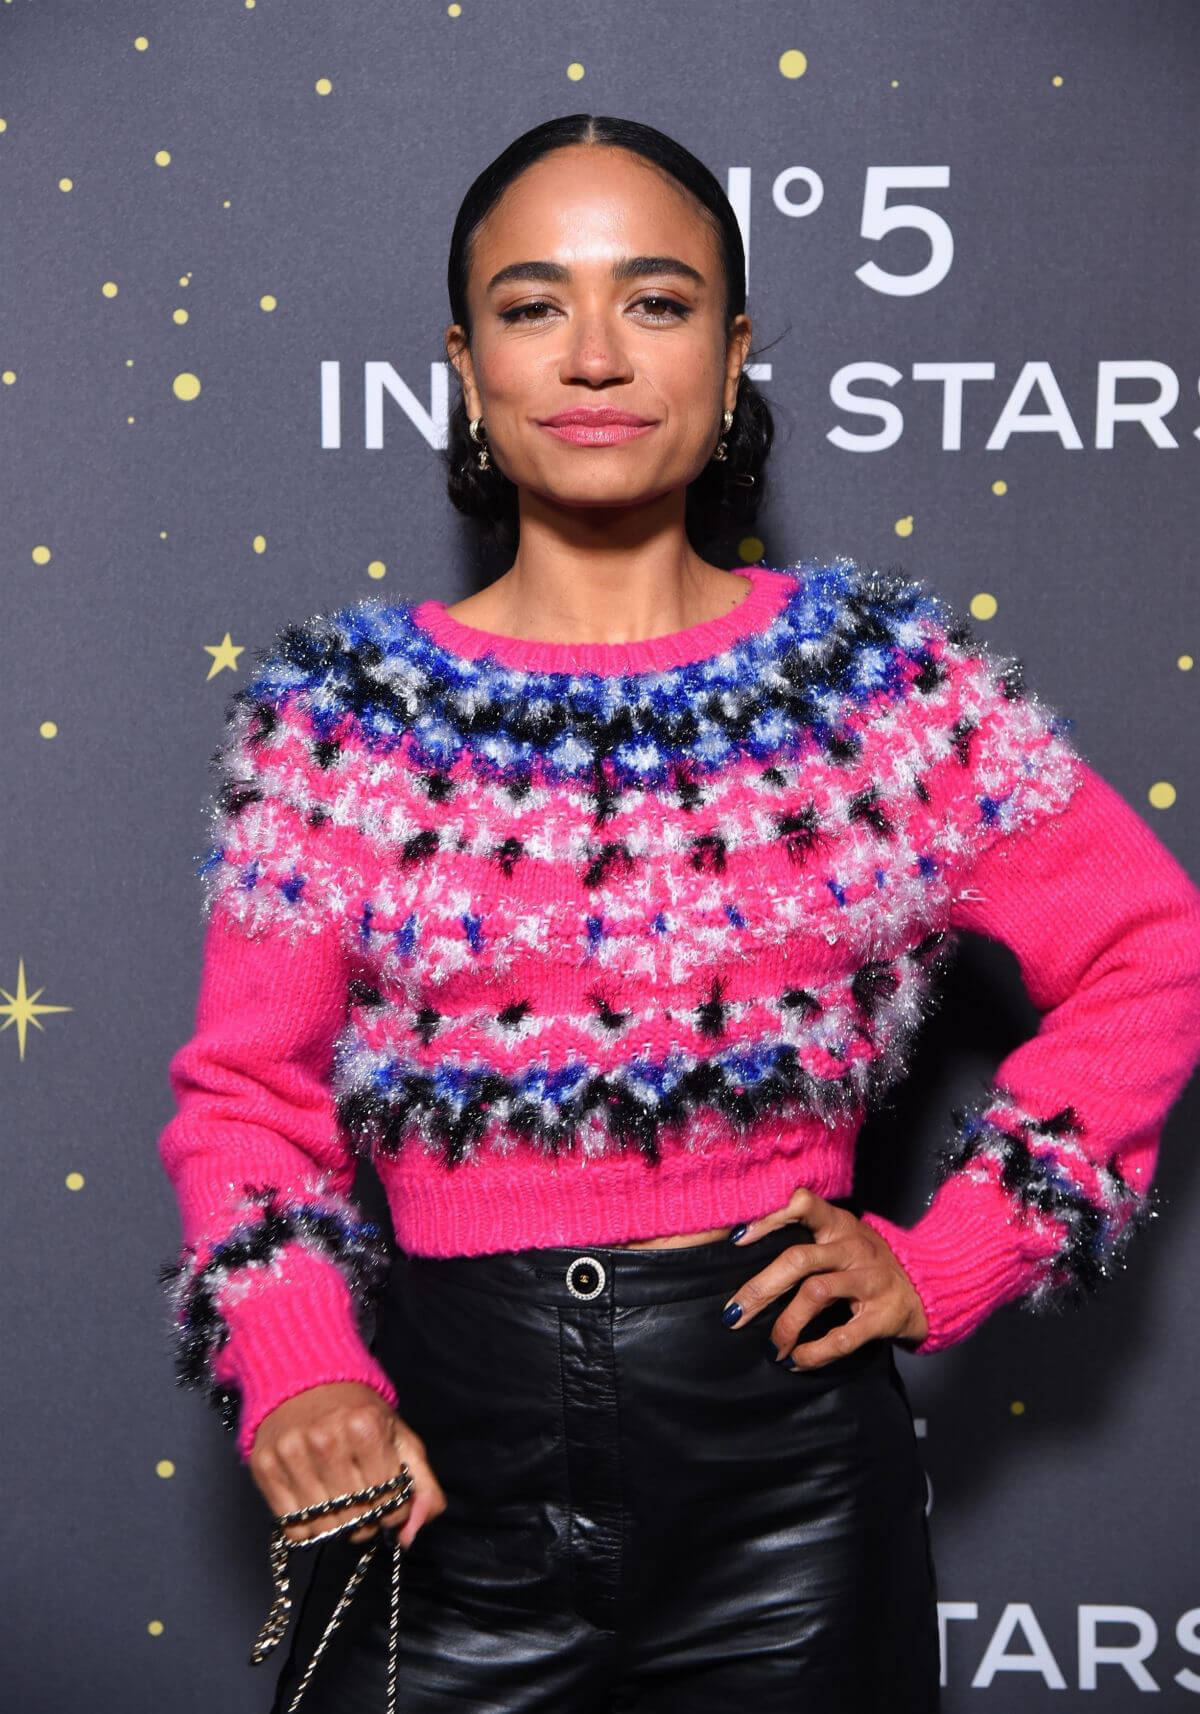 Lauren Ridloff attends Chanel Party to Celebrate Debut of Chanel N??5 in New York 11/05/2021